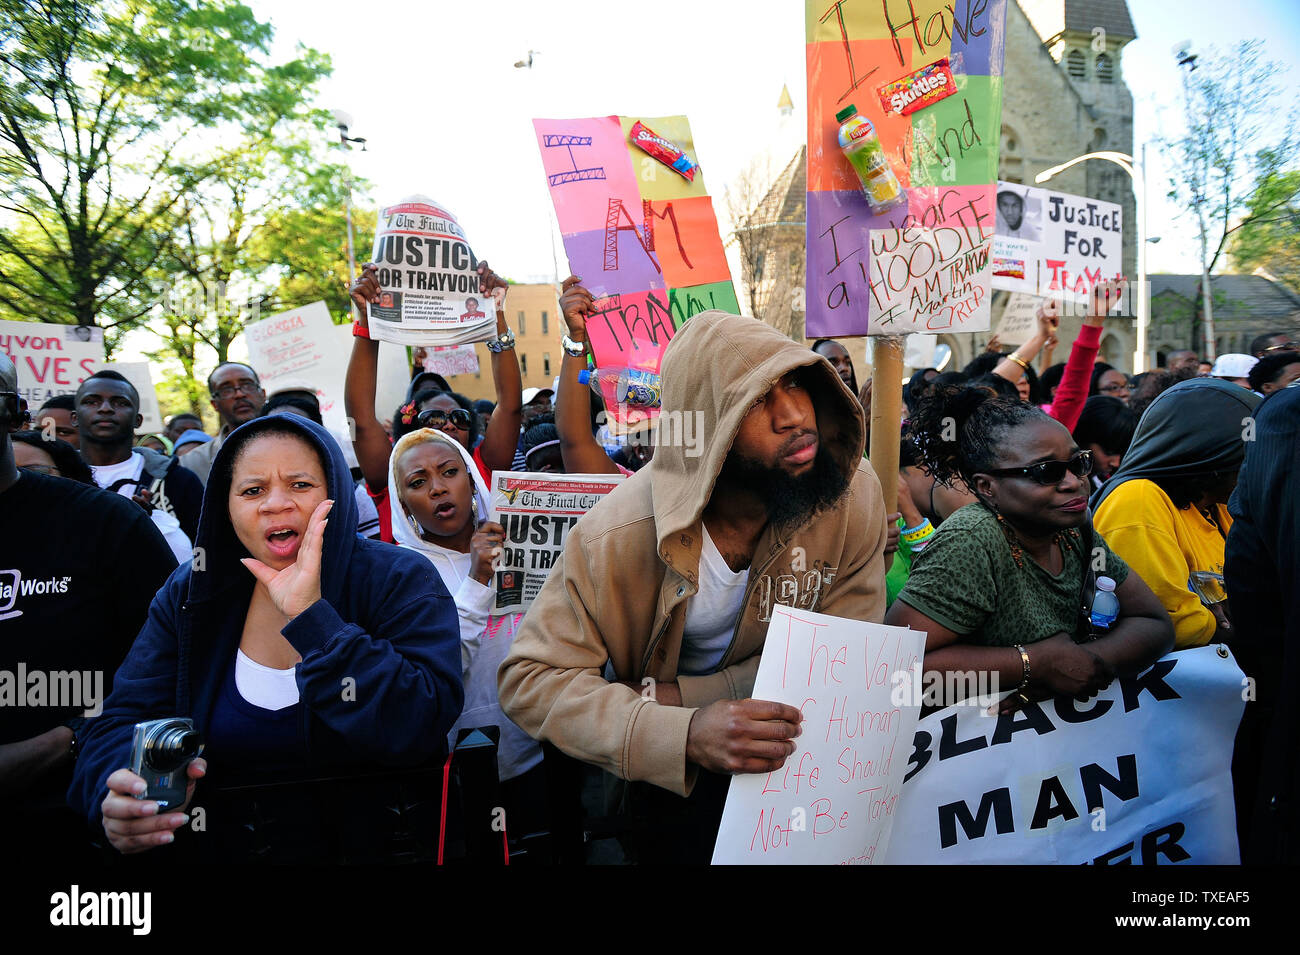 El-Regina Harrison, left, Edward Bruno-Gaston, center, and Ruby Bozeman-Davis, right, join several thousand students from historically black universities and local residents, some wearing hoodies, at a rally for slain youth Trayvon Martin in front of the state Capitol in Atlanta on March 26, 2012. A Capitol policeman said it was the largest rally in recent memory and several downtown streets were closed down, snarling the evening rush hour.    UPI/David Tulis Stock Photo